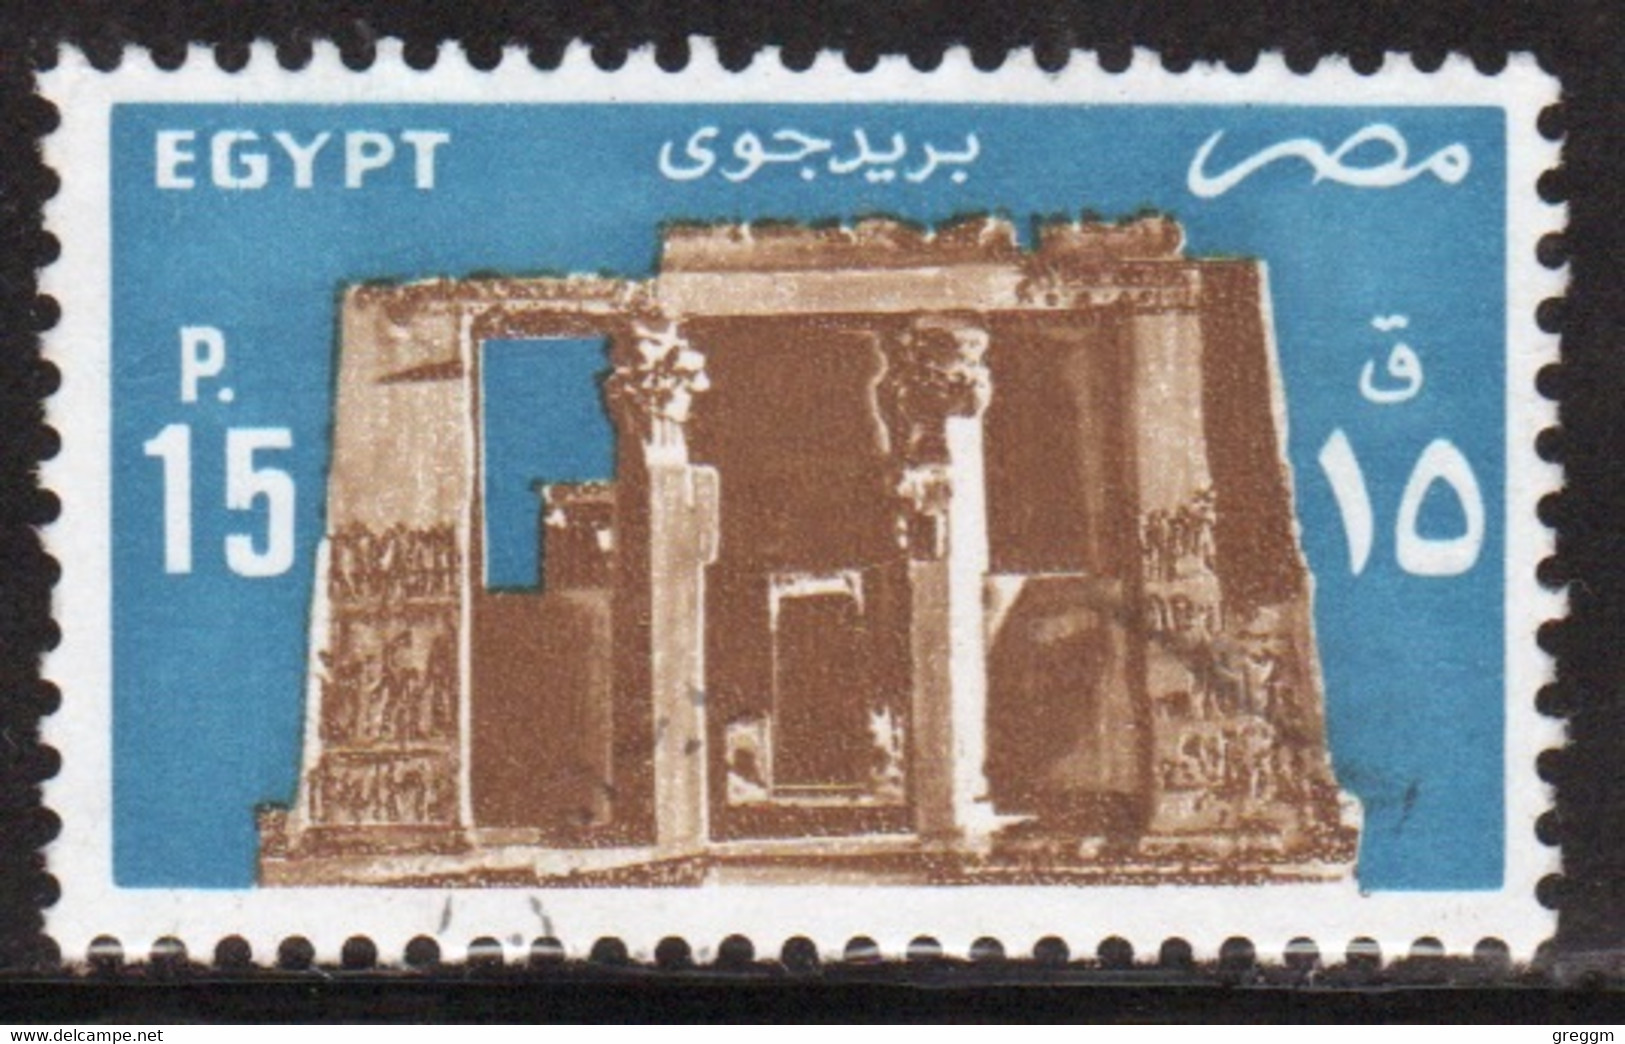 Egypt UAR 1985 Single 15p Stamp Issued To Celebrate Air Mail In Fine Used - Oblitérés